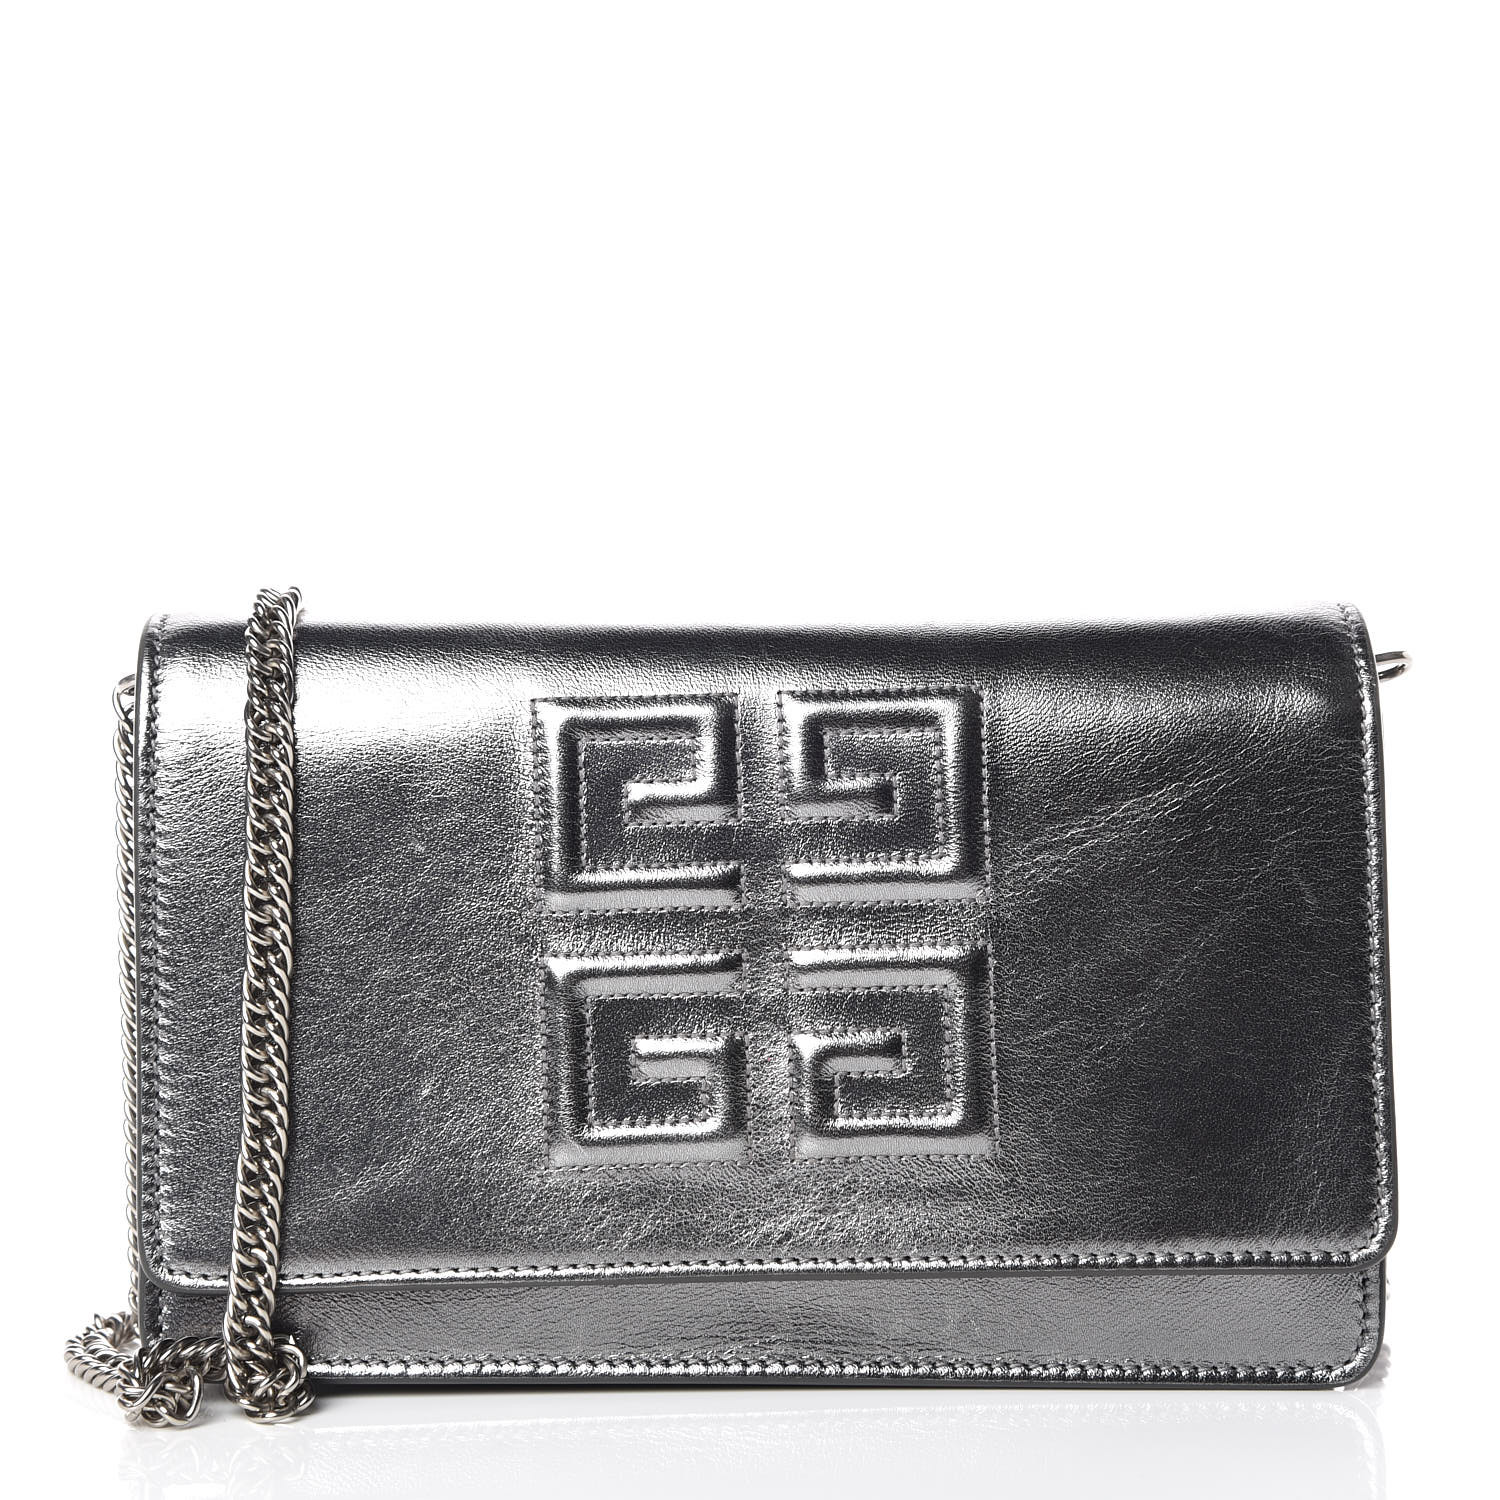 givenchy emblem chain wallet